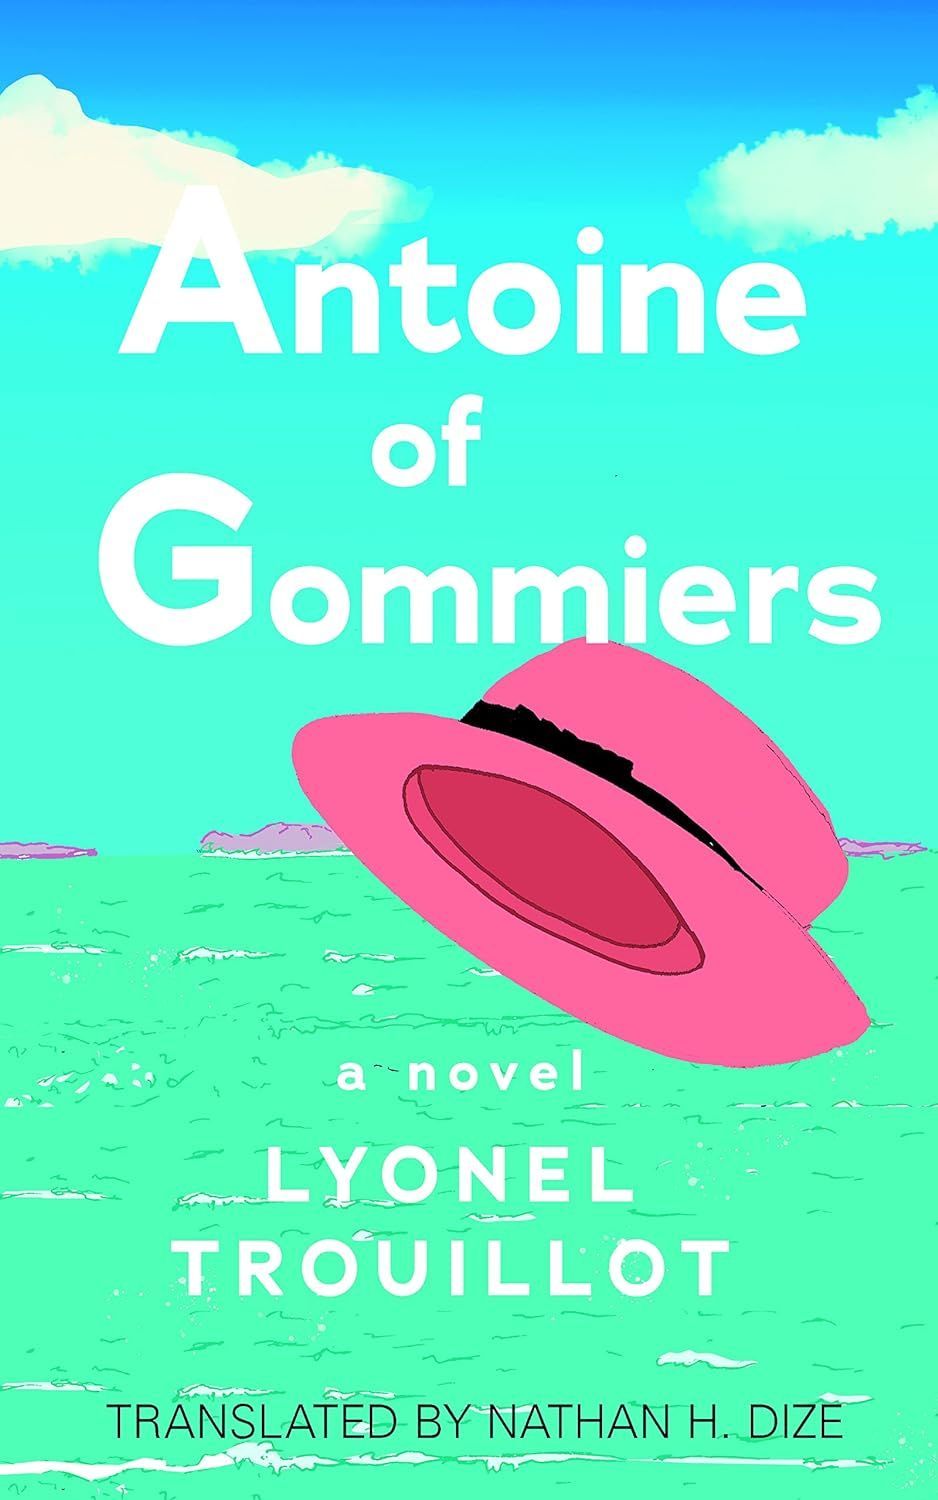 Either You Invite Us Inside, or We Invite Ourselves: On Lyonel Trouillot’s “Antoine of Gommiers”